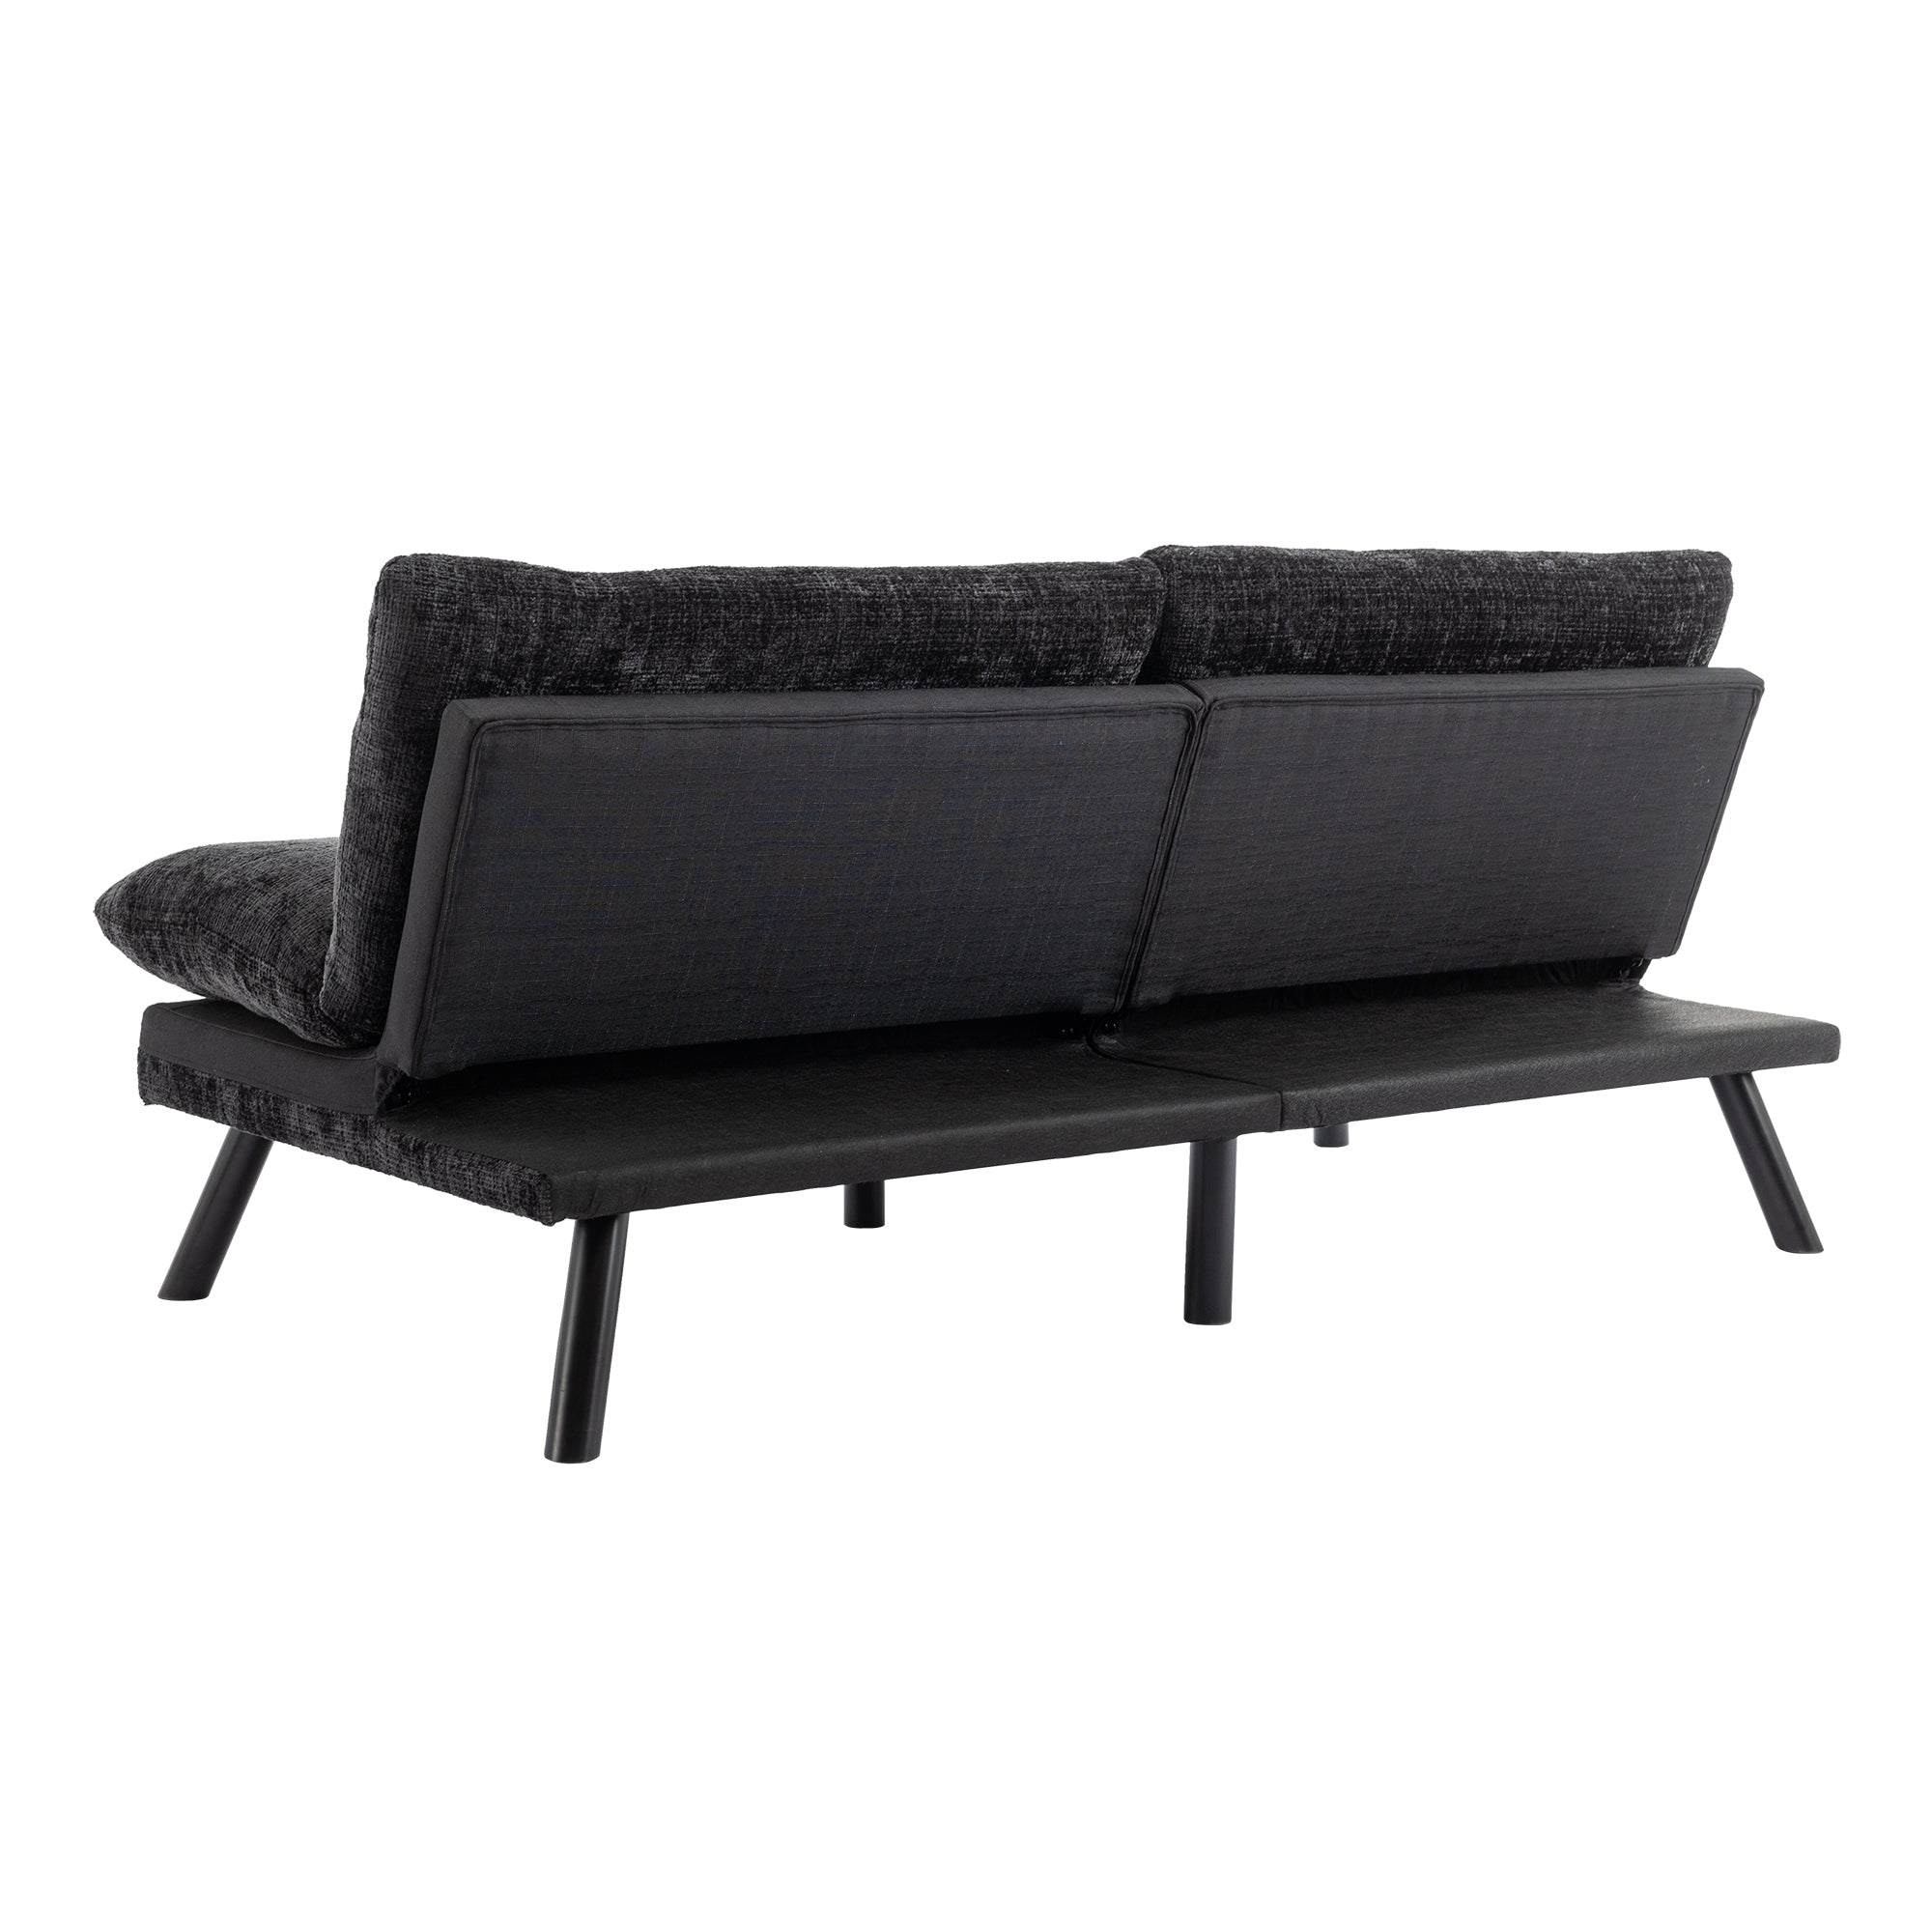 Convertible Sofa Bed  Loveseat Futon Bed Breathable Adjustable Lounge Couch with Metal Legs,Futon Sets for Compact Living Space  Chenille